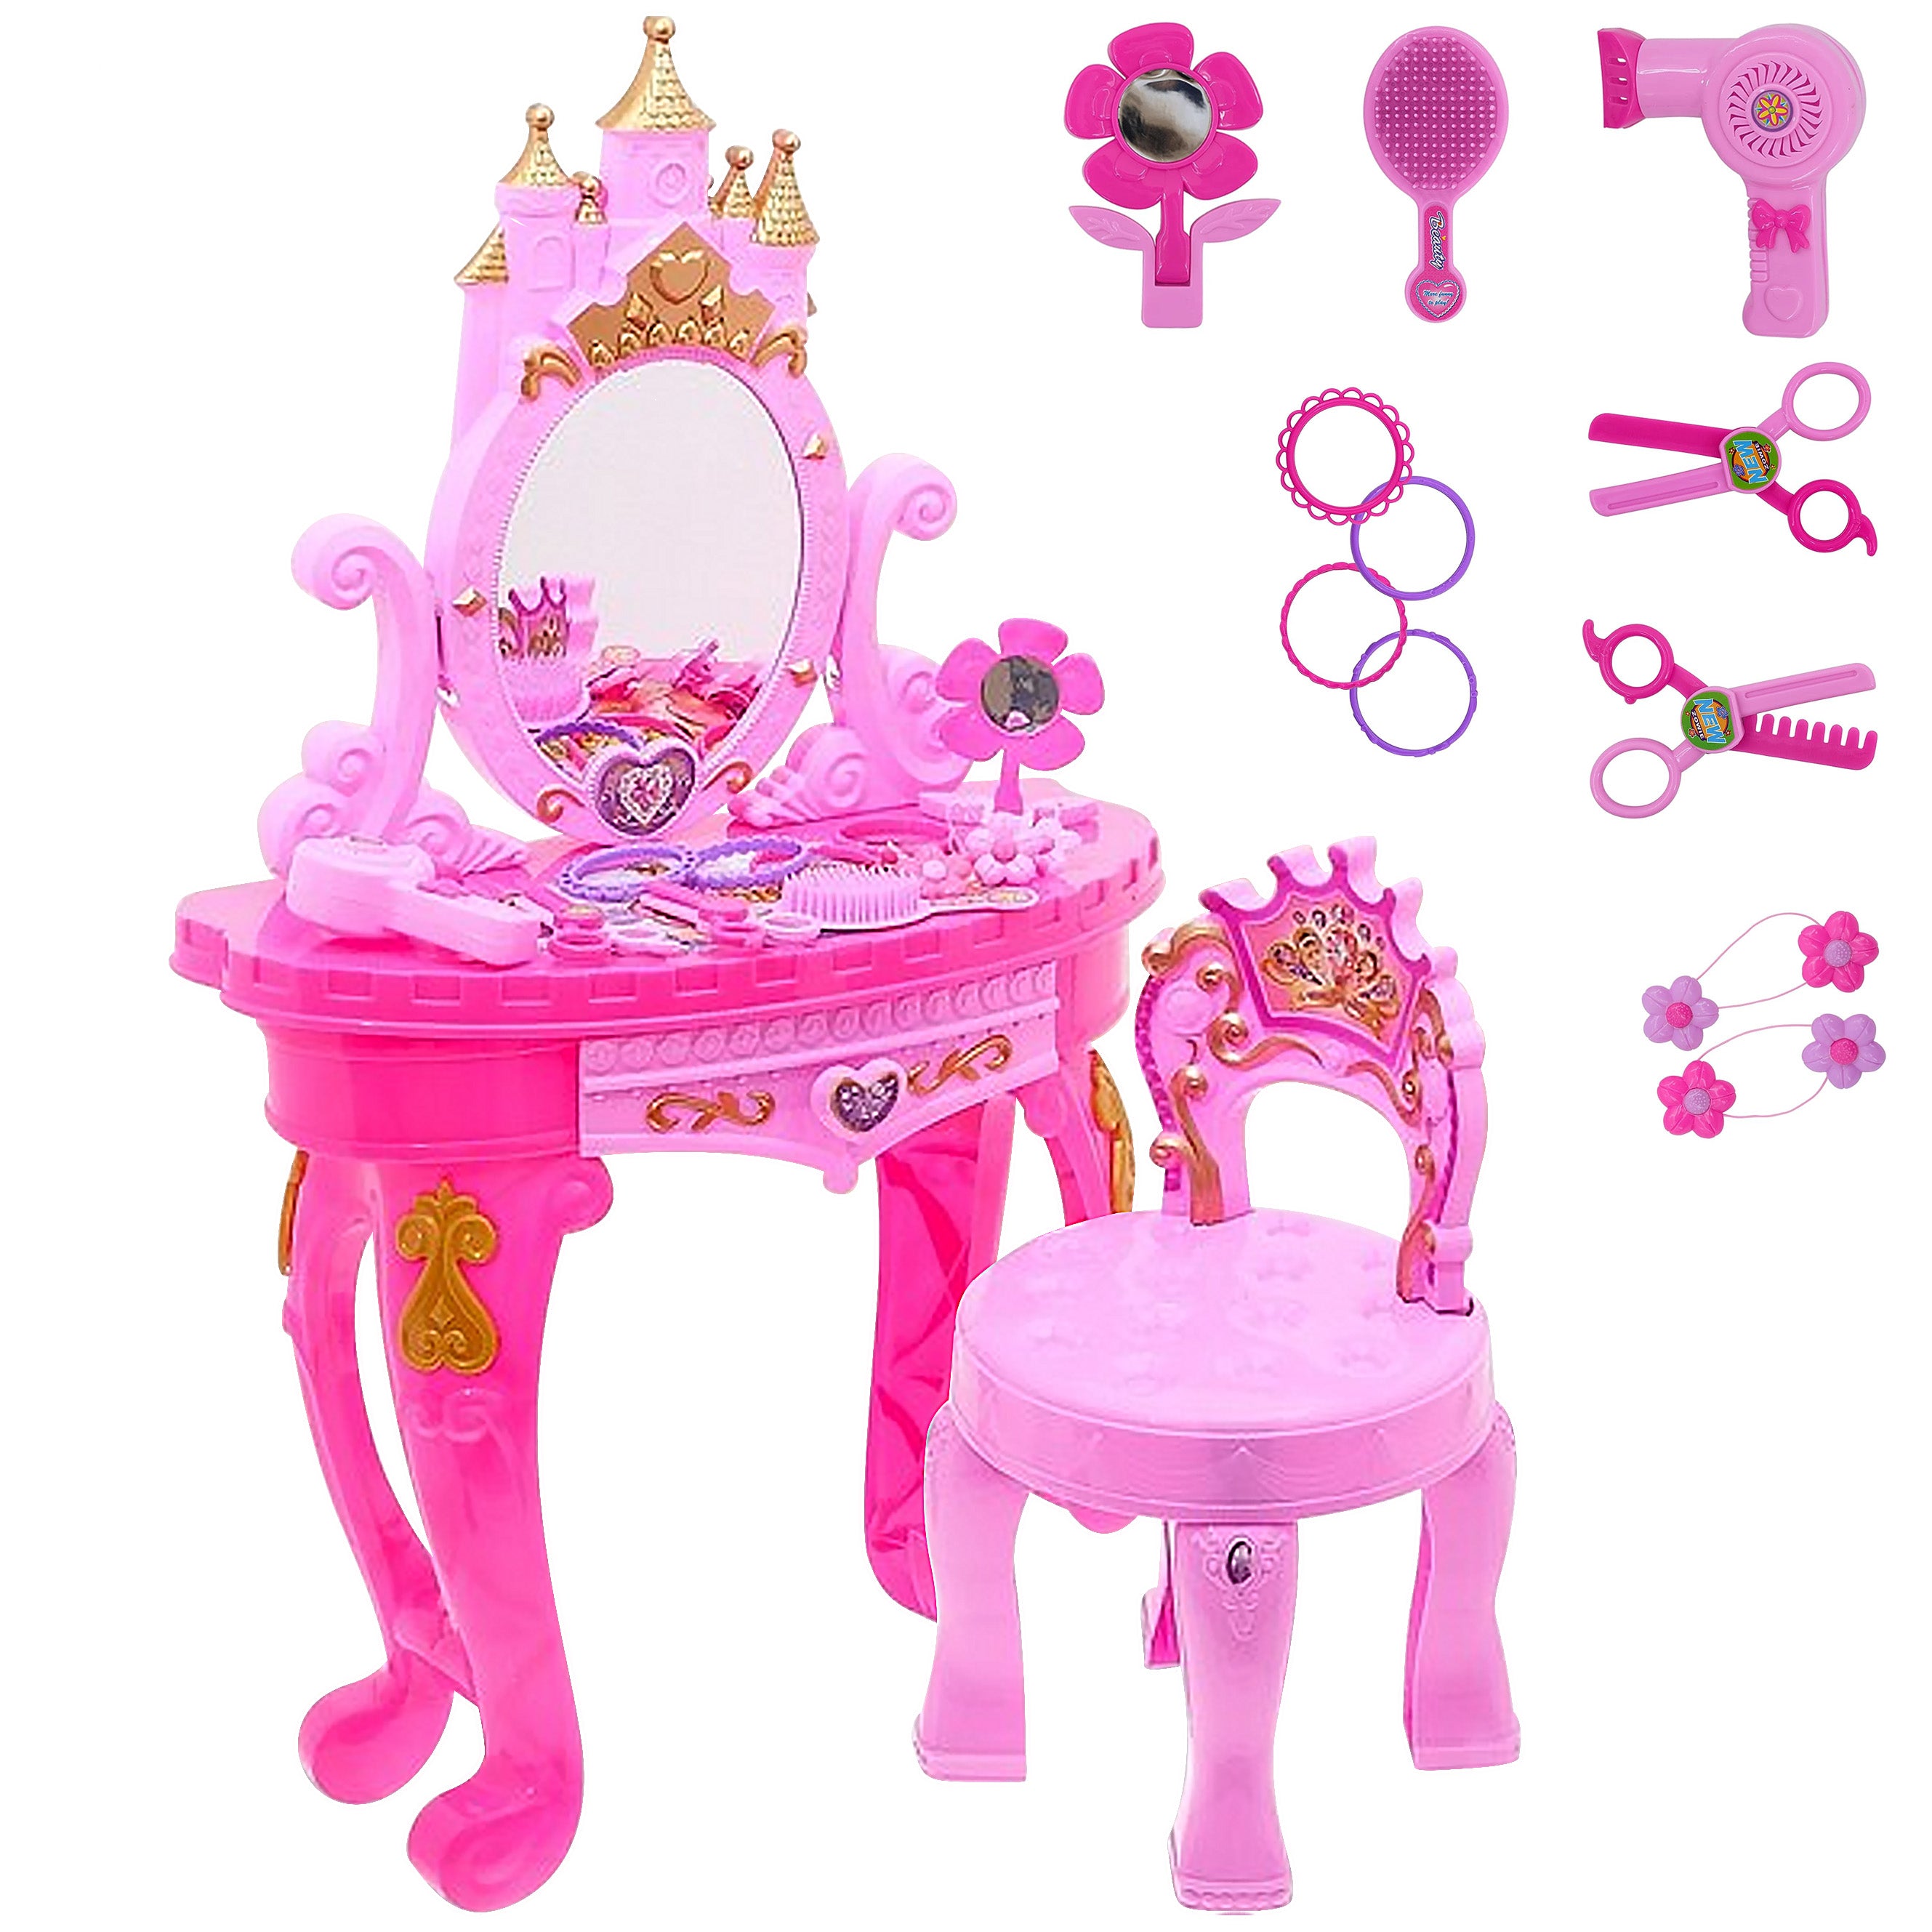 The Magic Toy Shop Playset Princess Vanity Dressing Table & Stool Toy